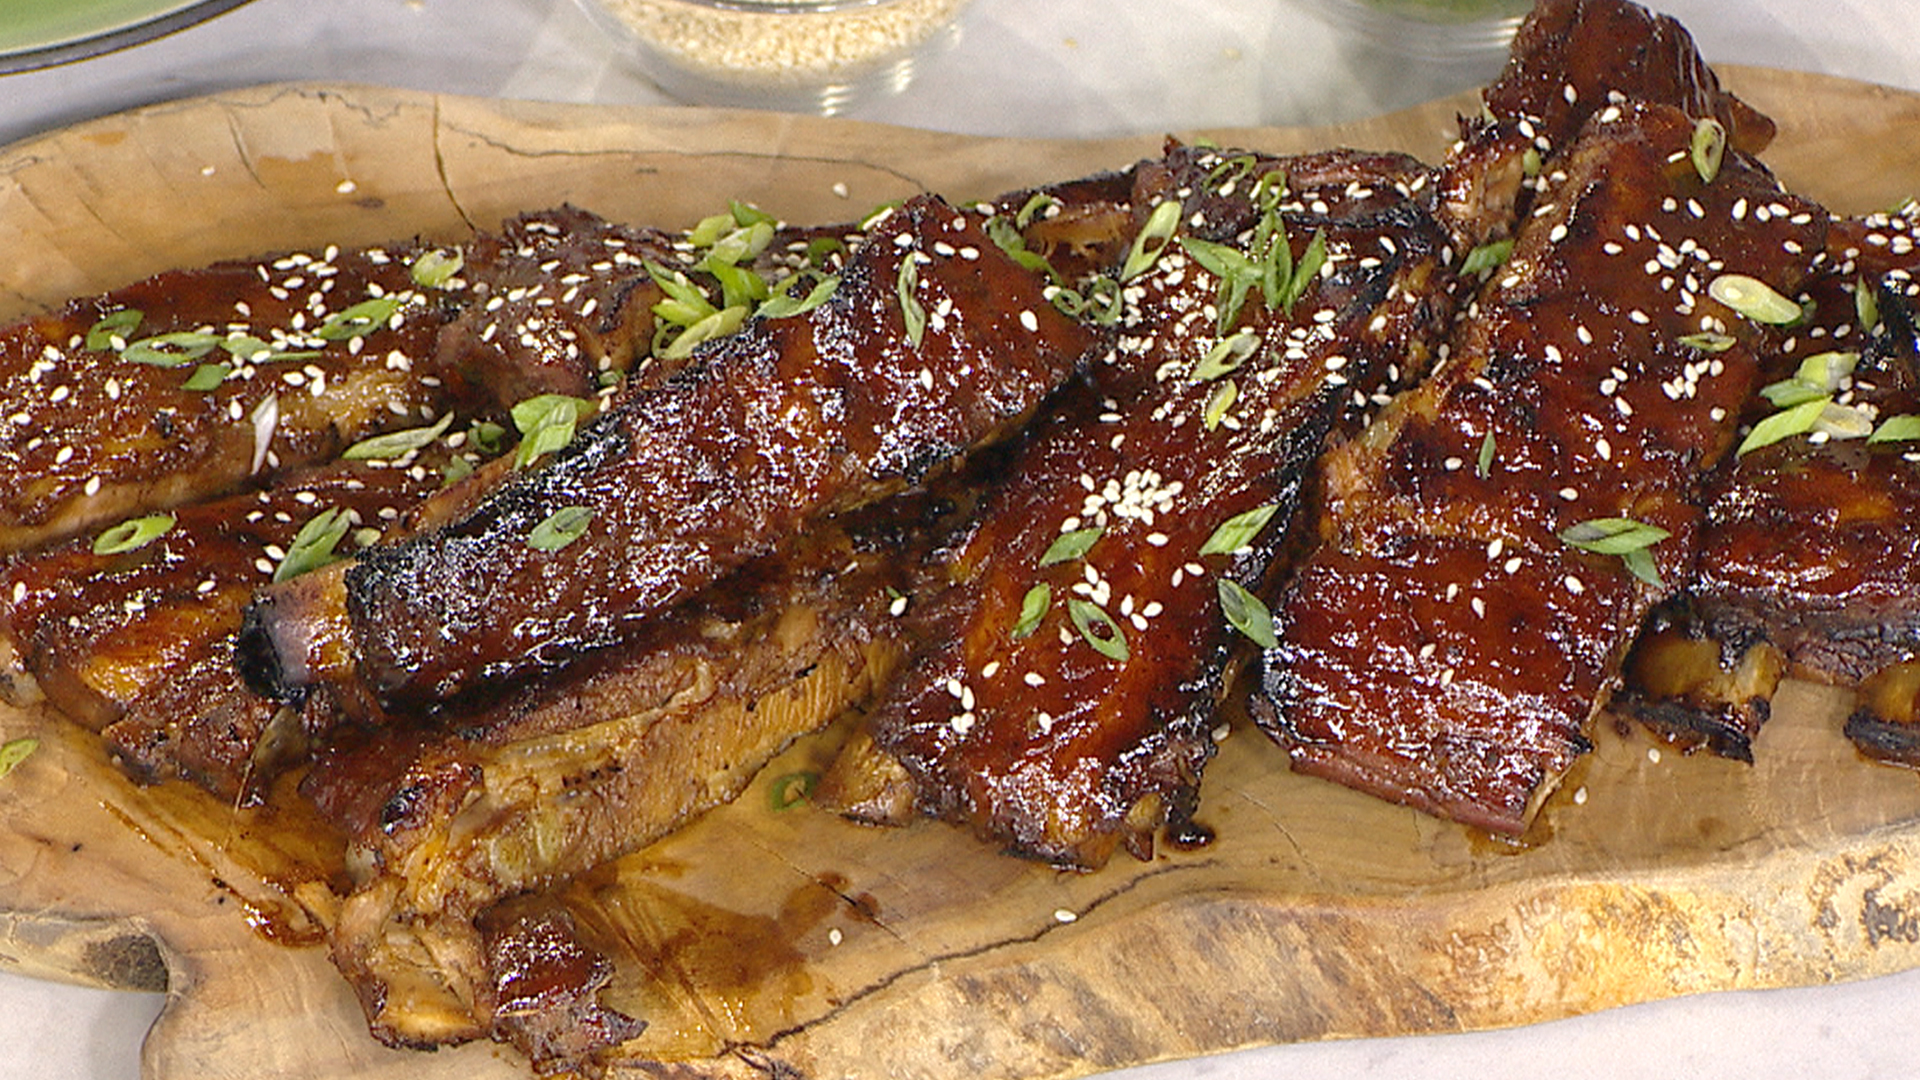 Forget takeout! Make Chinese-style marinated pork ribs at home - TODAY.com